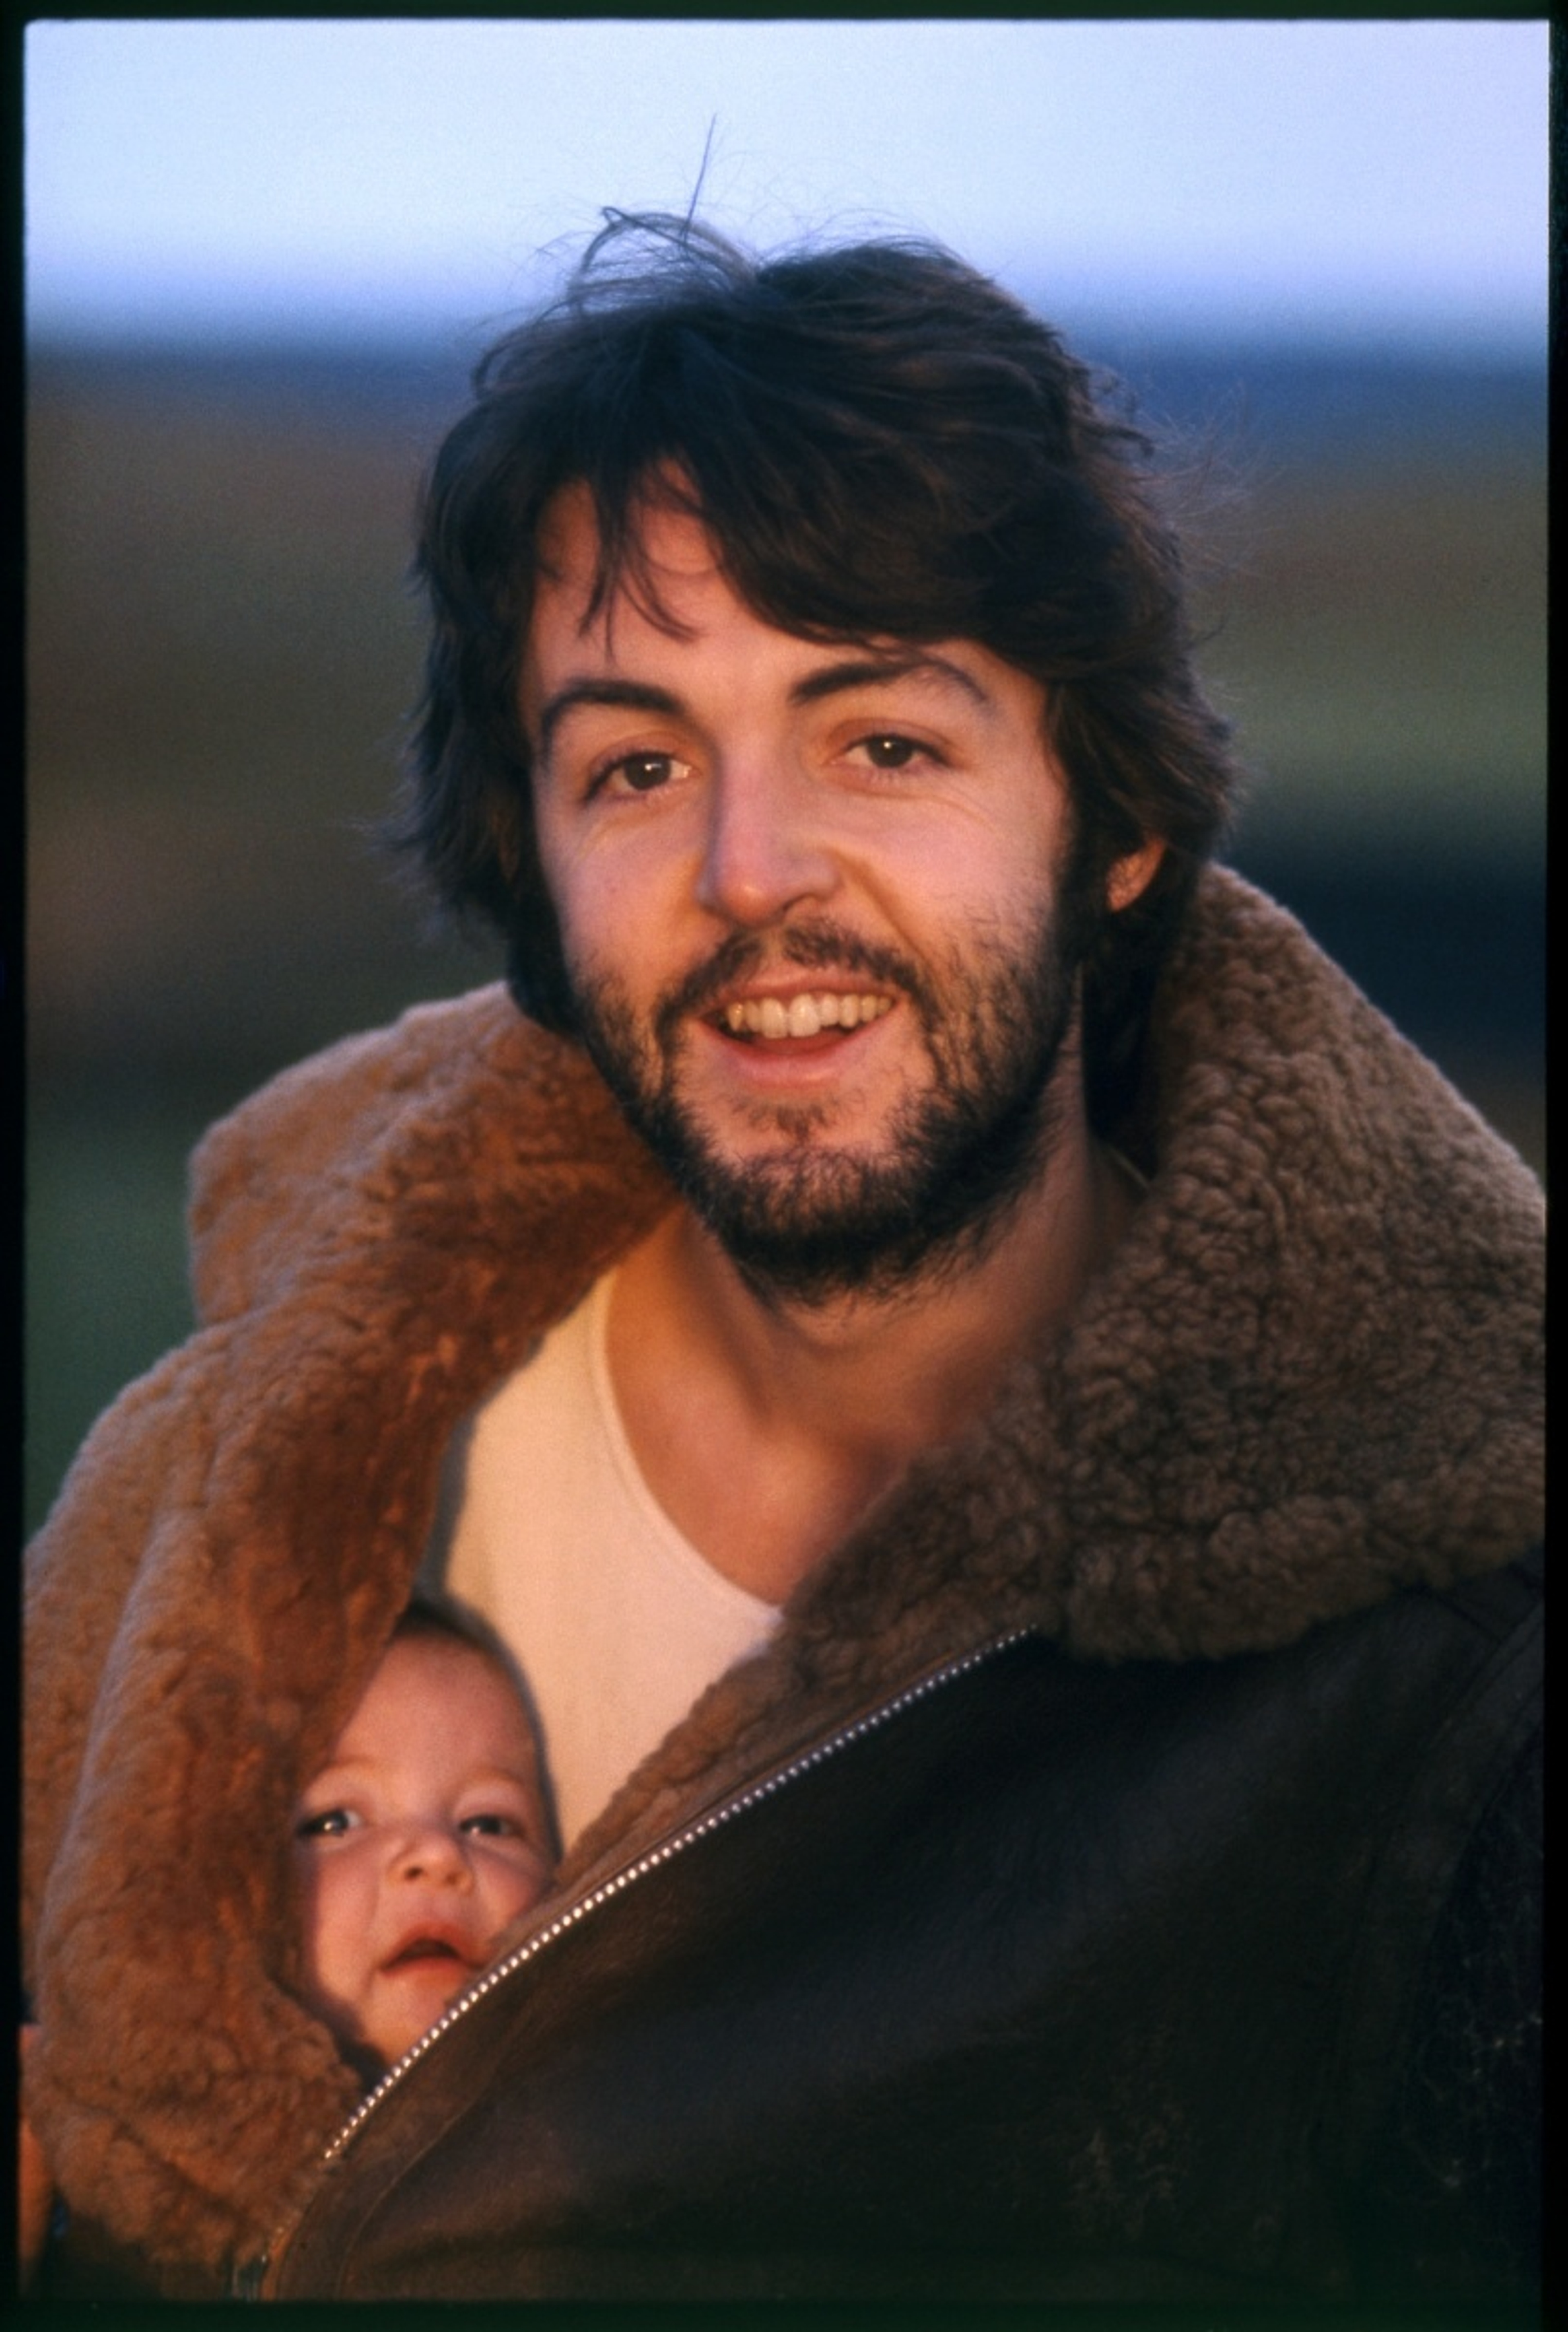 The McCartney family donated 63 Linda McCartney photographic prints to the Victoria & Albert Museum, London. May 2018.